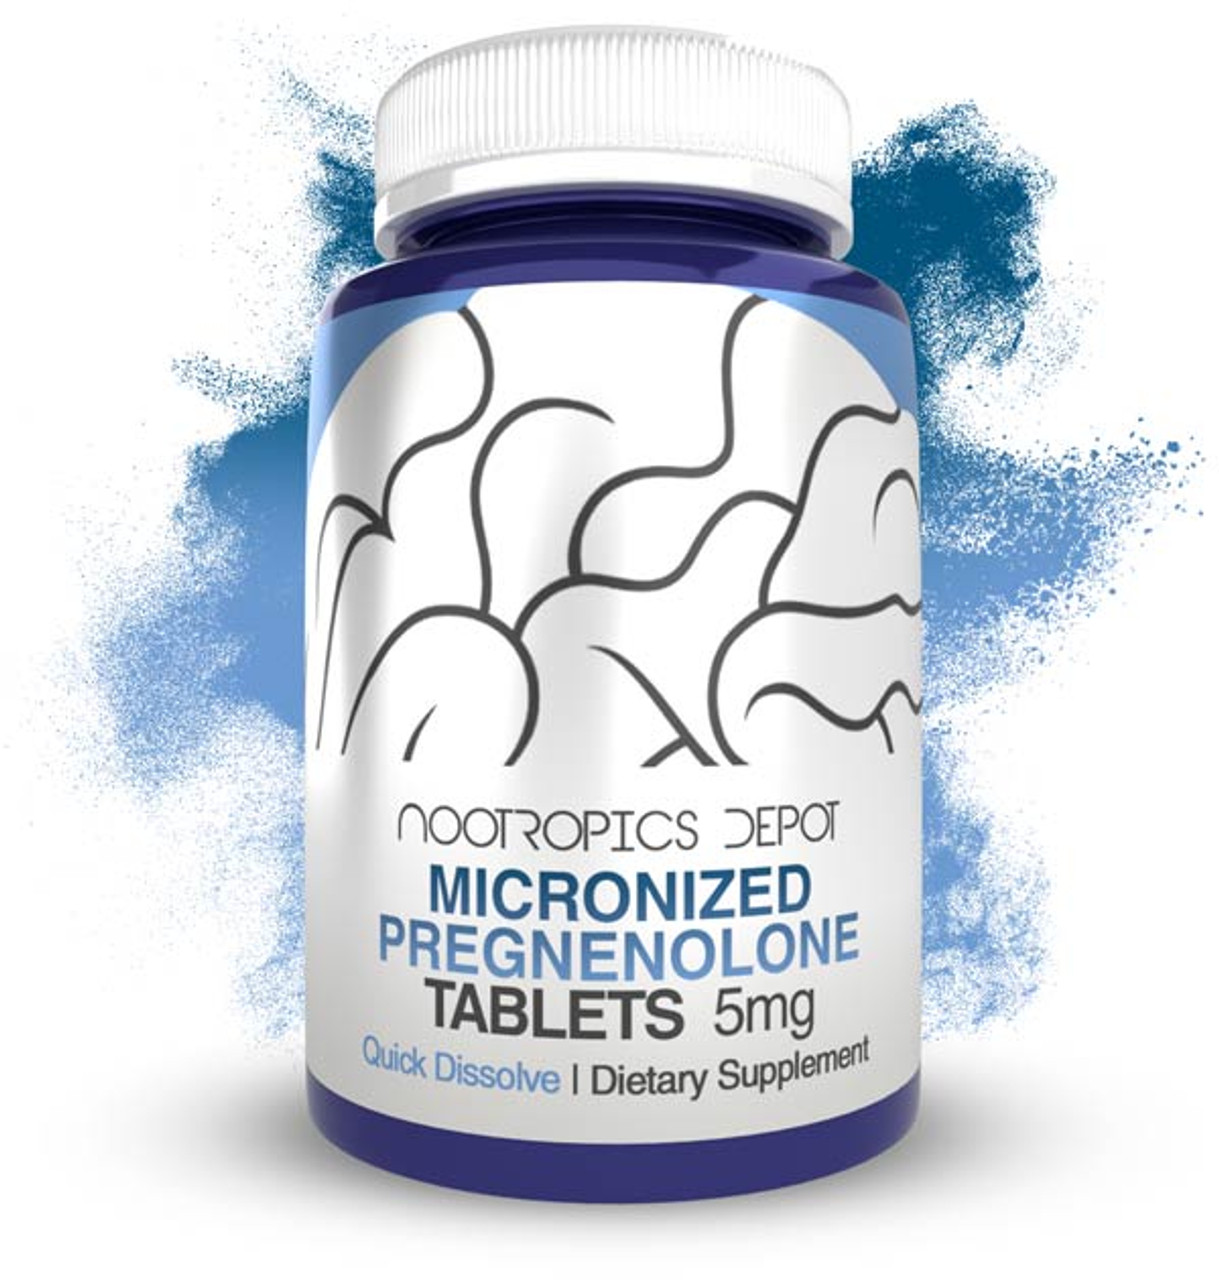 Our Top Recommendation: Pregnenolone Quick Dissolve Tablets